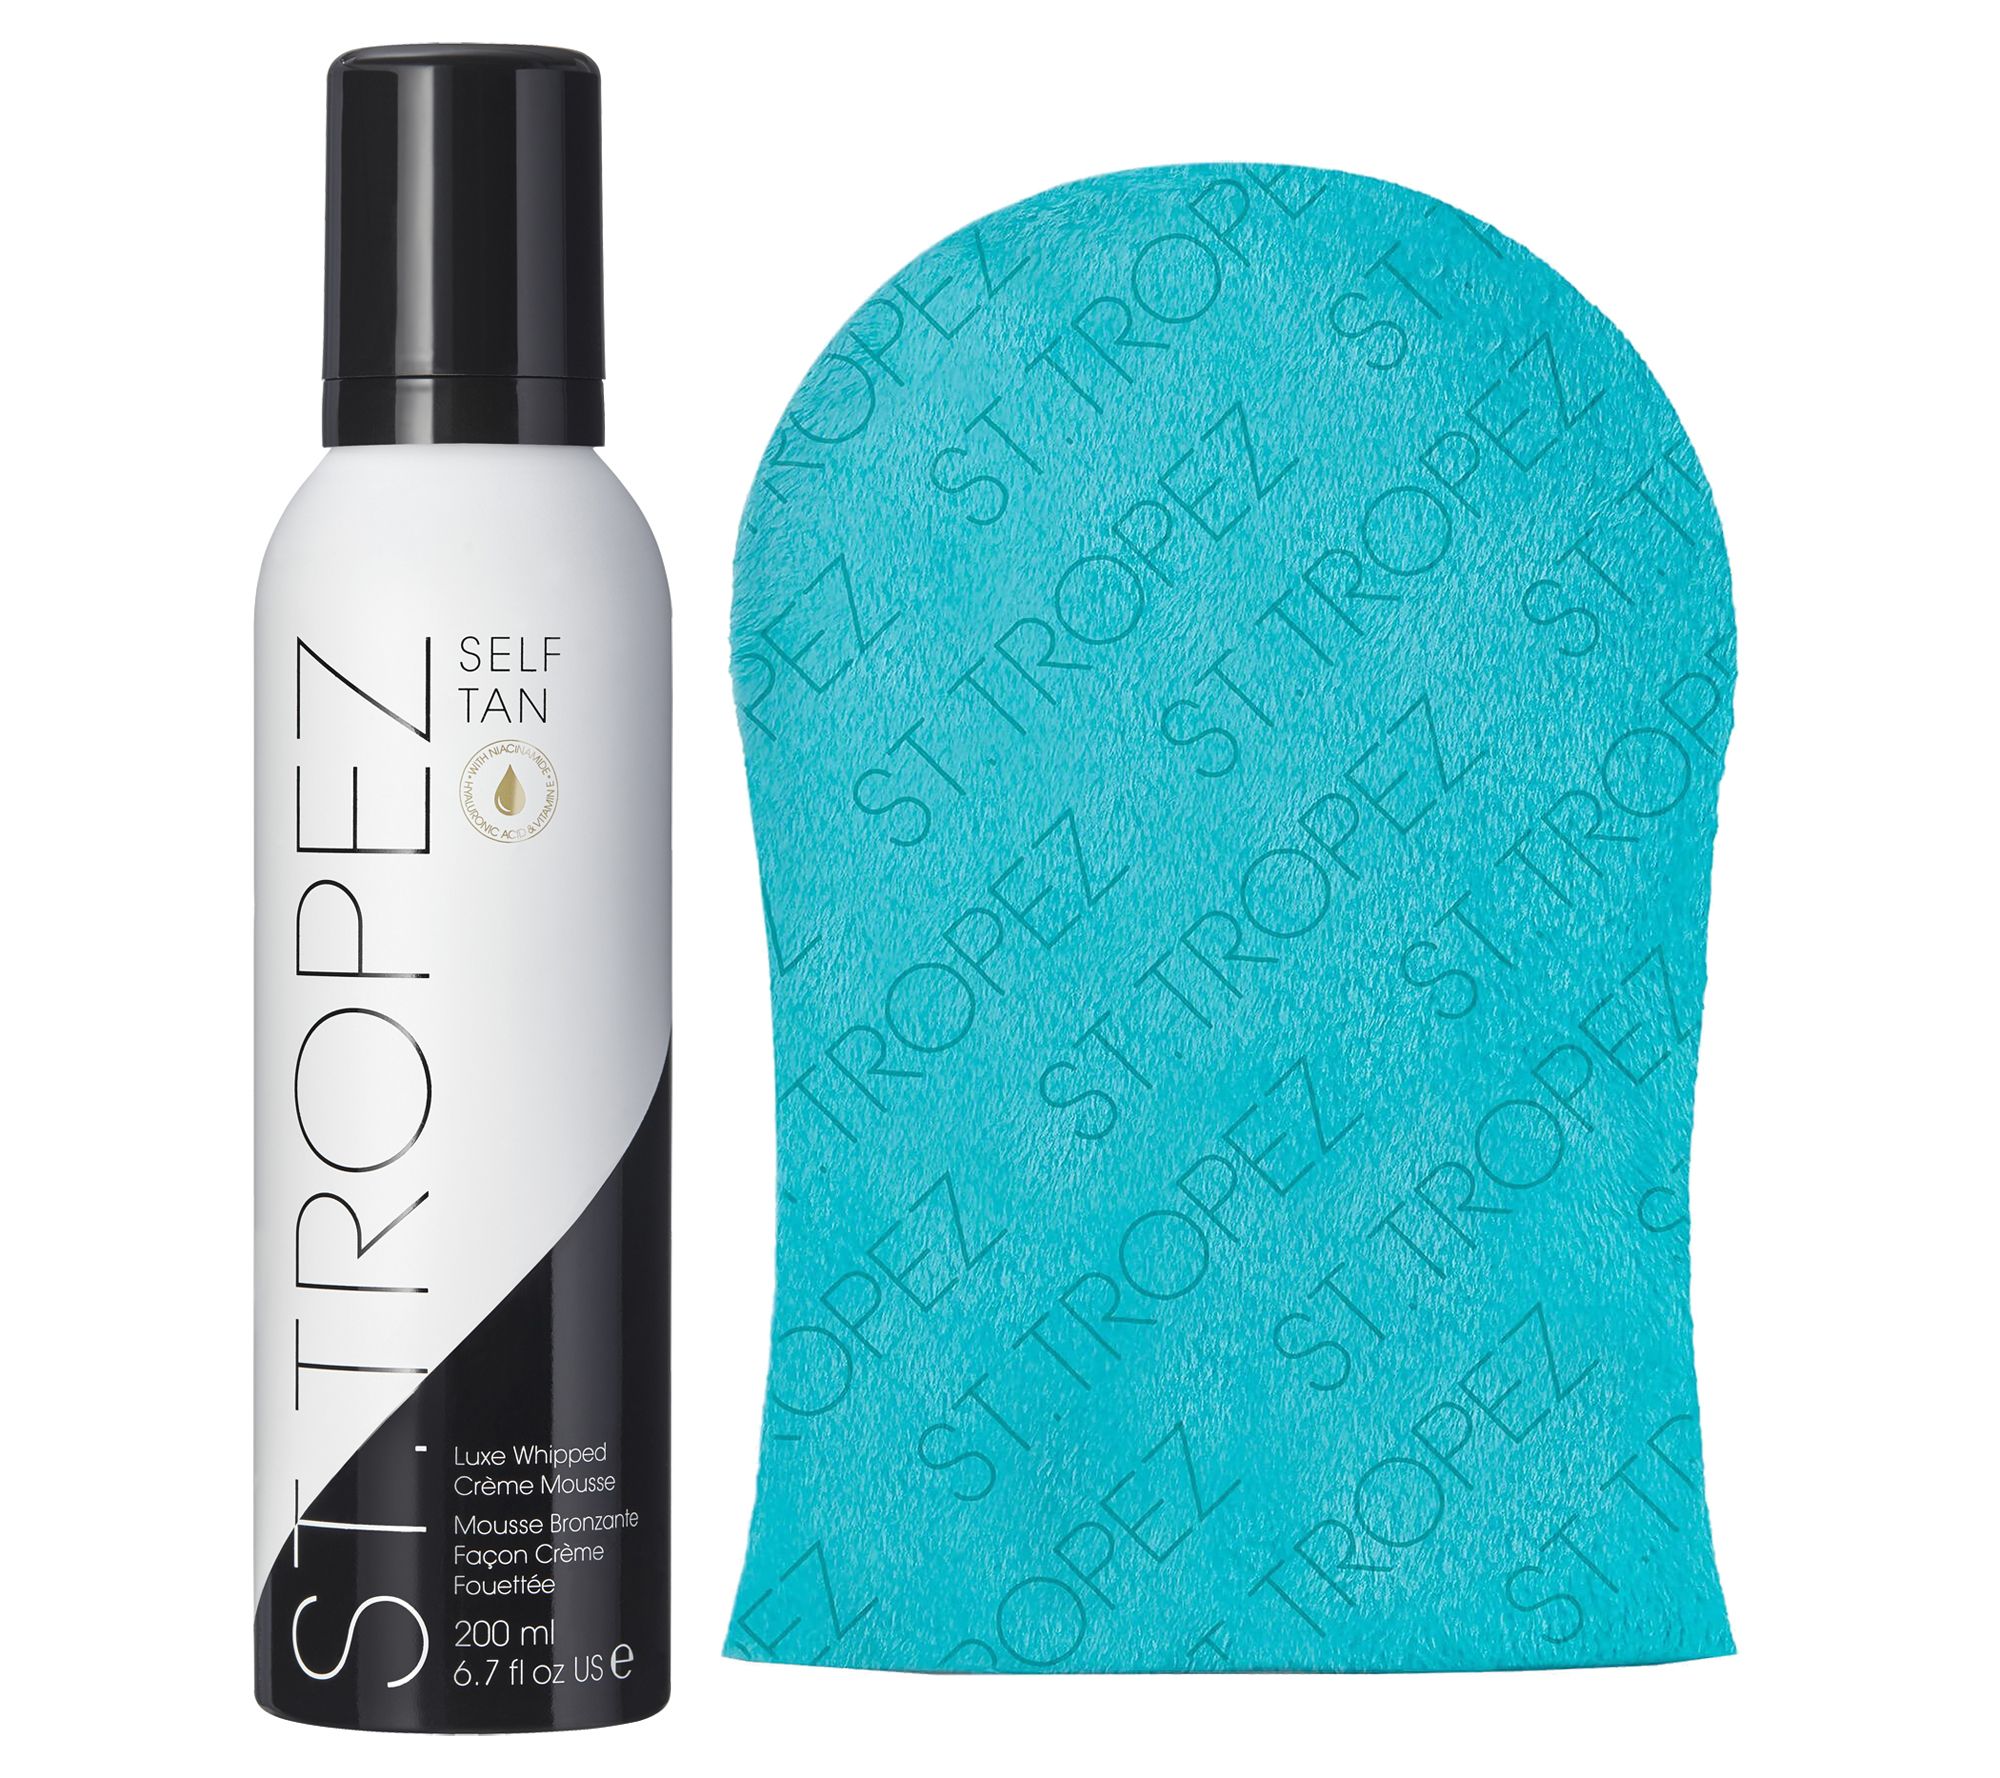 St. Tan Luxe Tropez Mousse with Creme Whipped Mitt Self